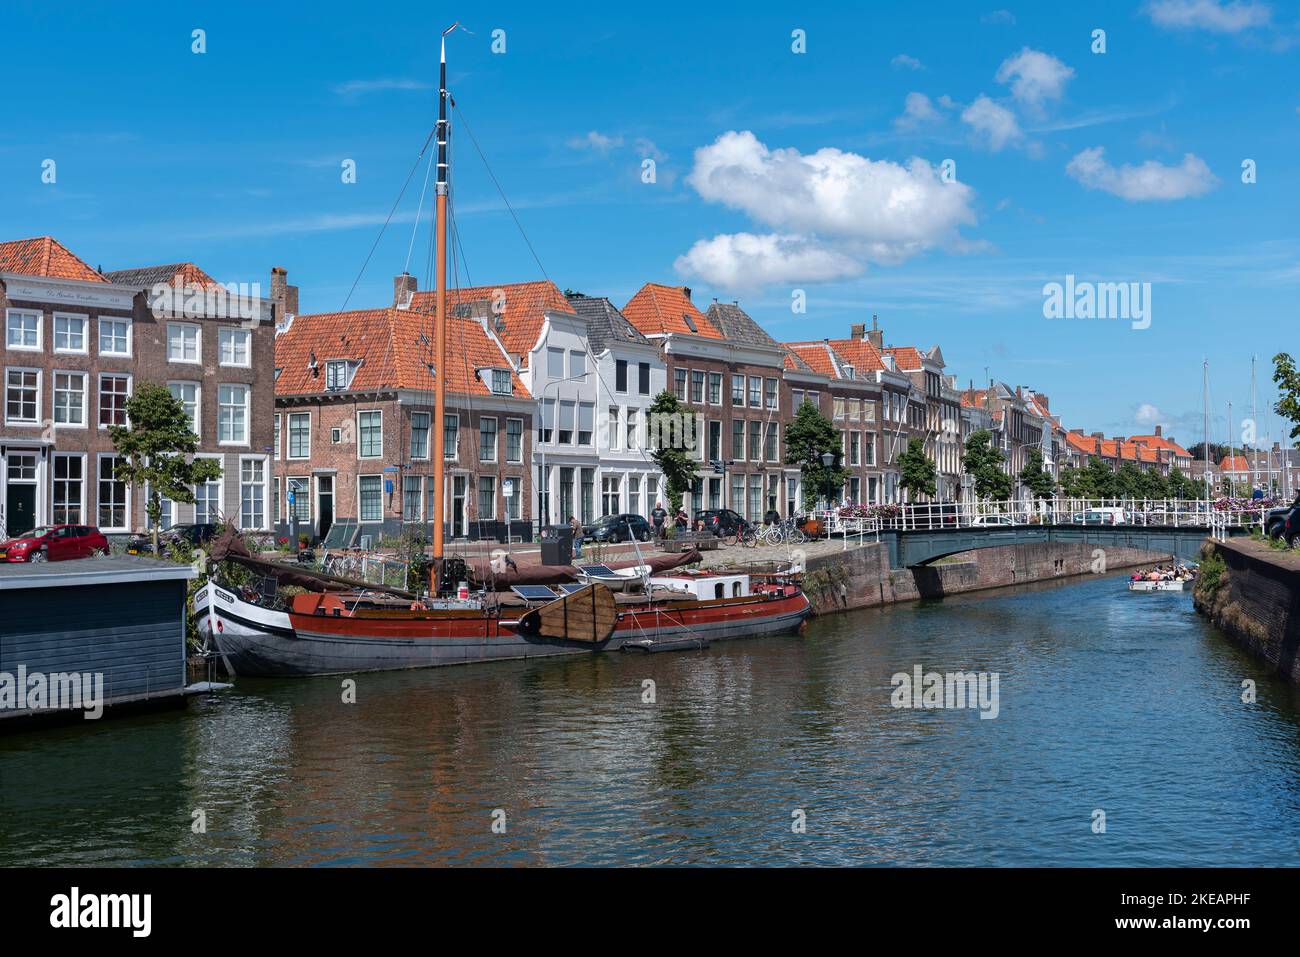 Cityscape with traditional flat-bottomed sailing boats on the Bierkaai,, Middelburg, Zeeland, Netherlands, Europe Stock Photo